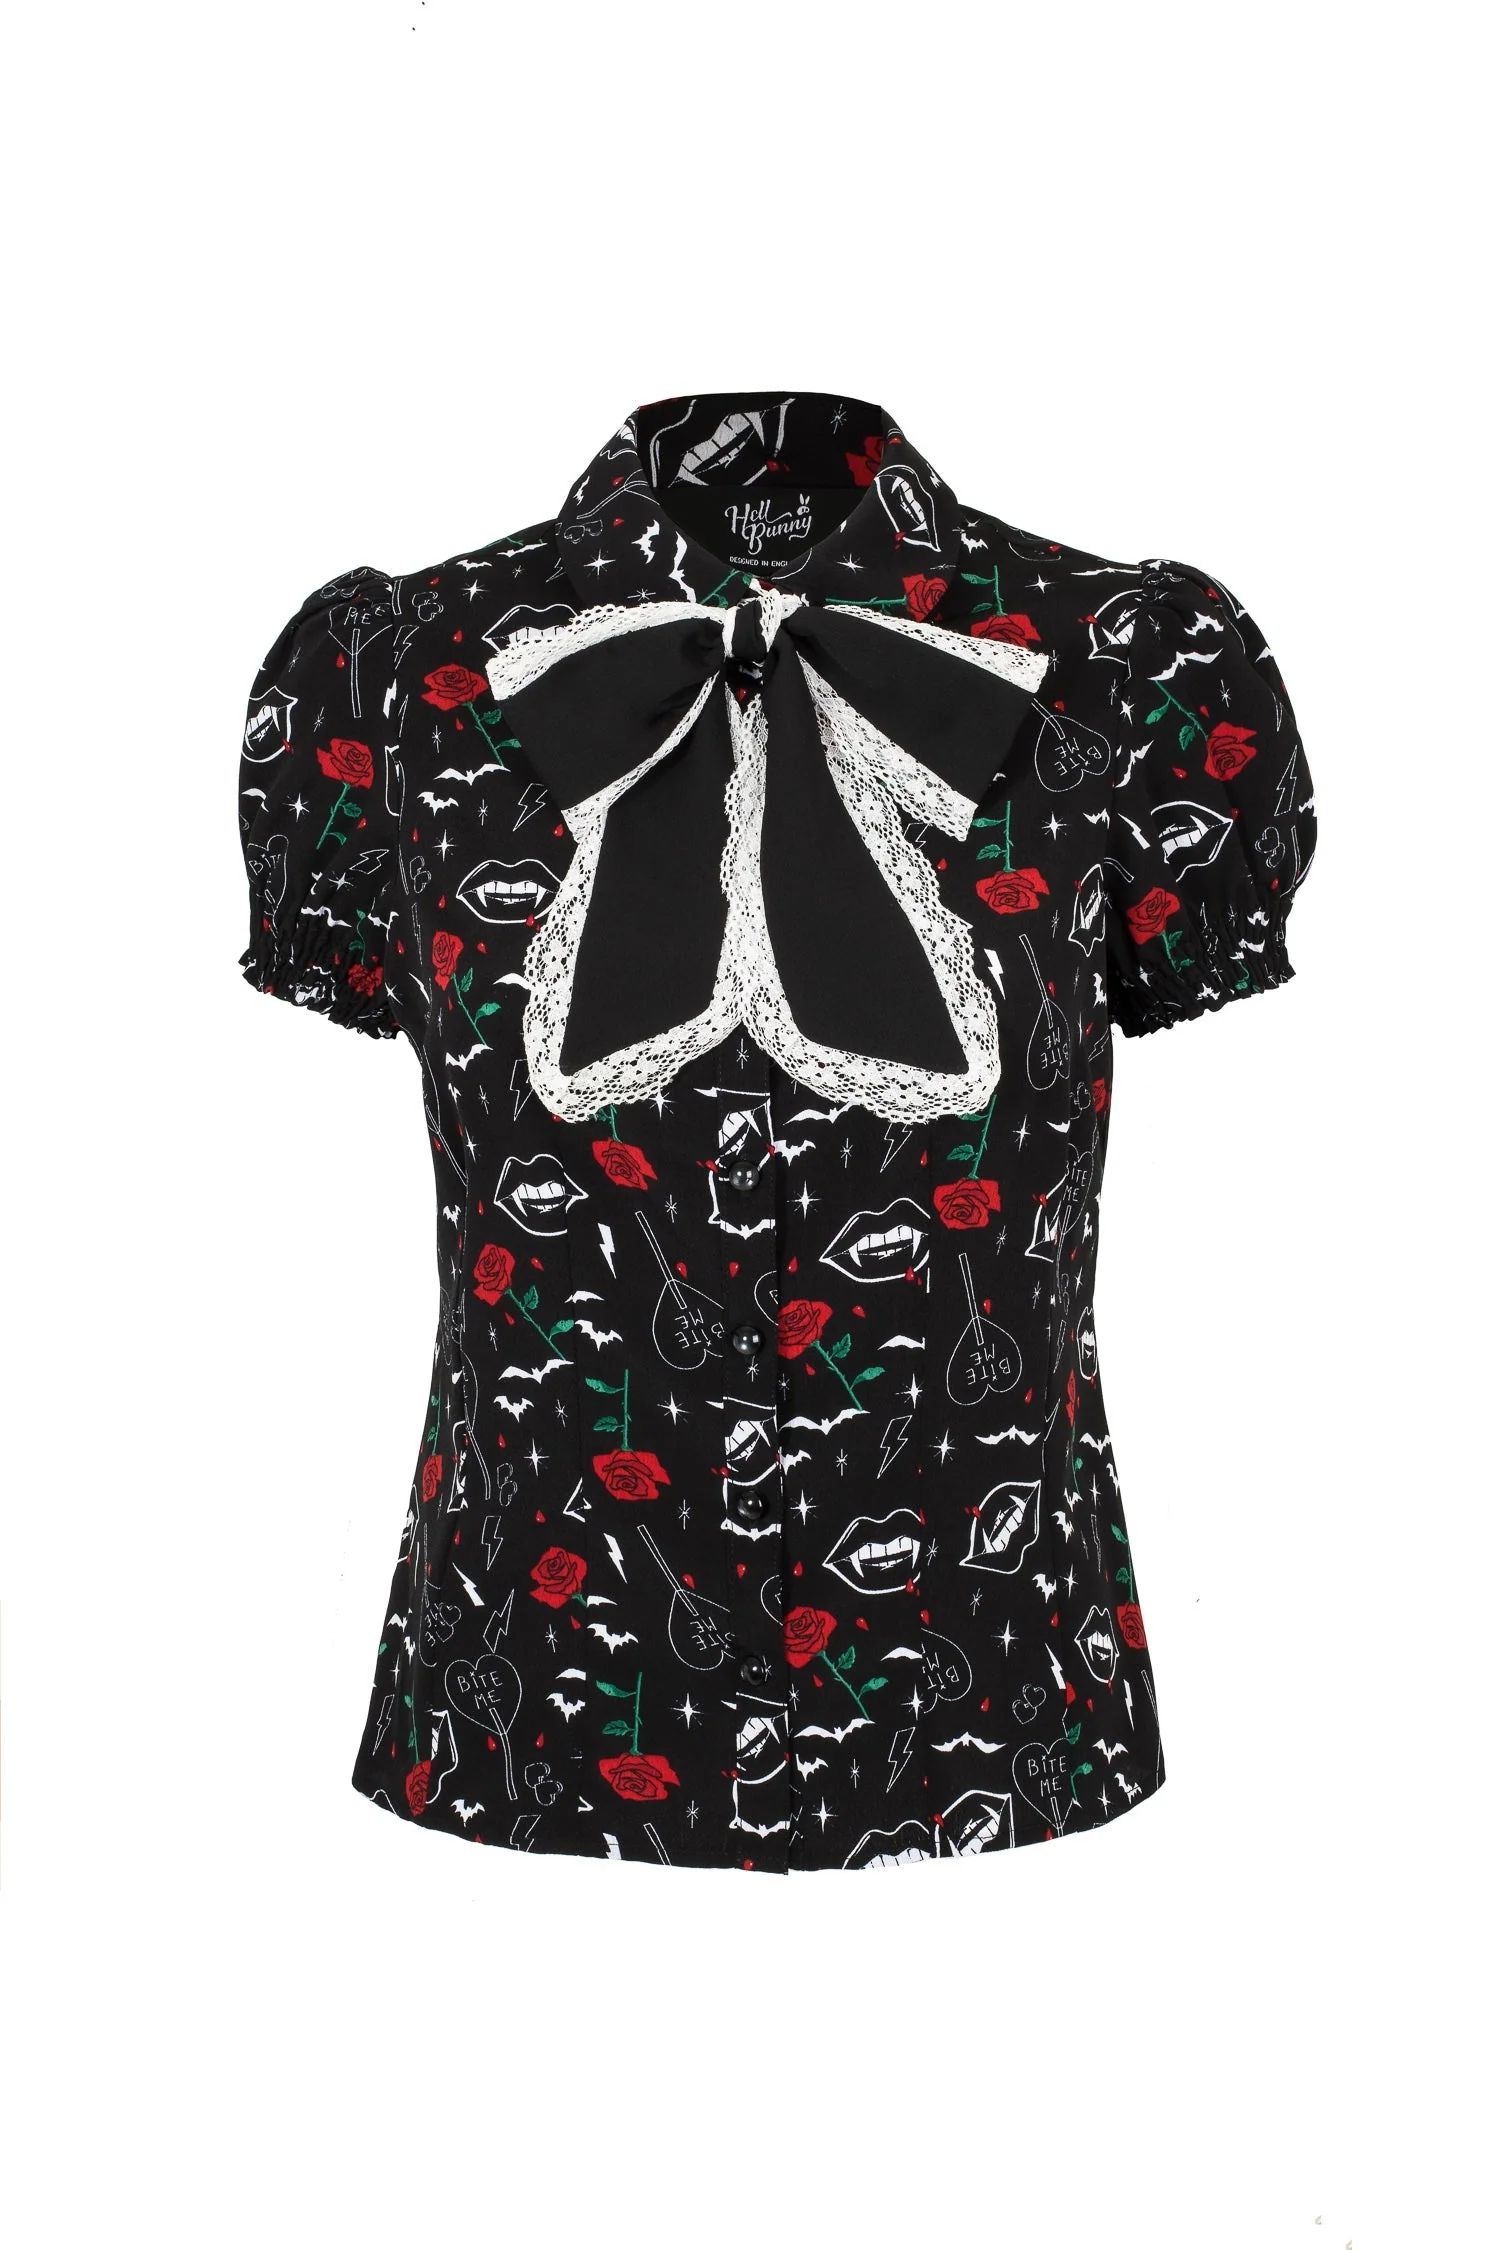 PS60276bbbb-chemisier-blouse-robe-gothique-rock-hell-bunny-lilith